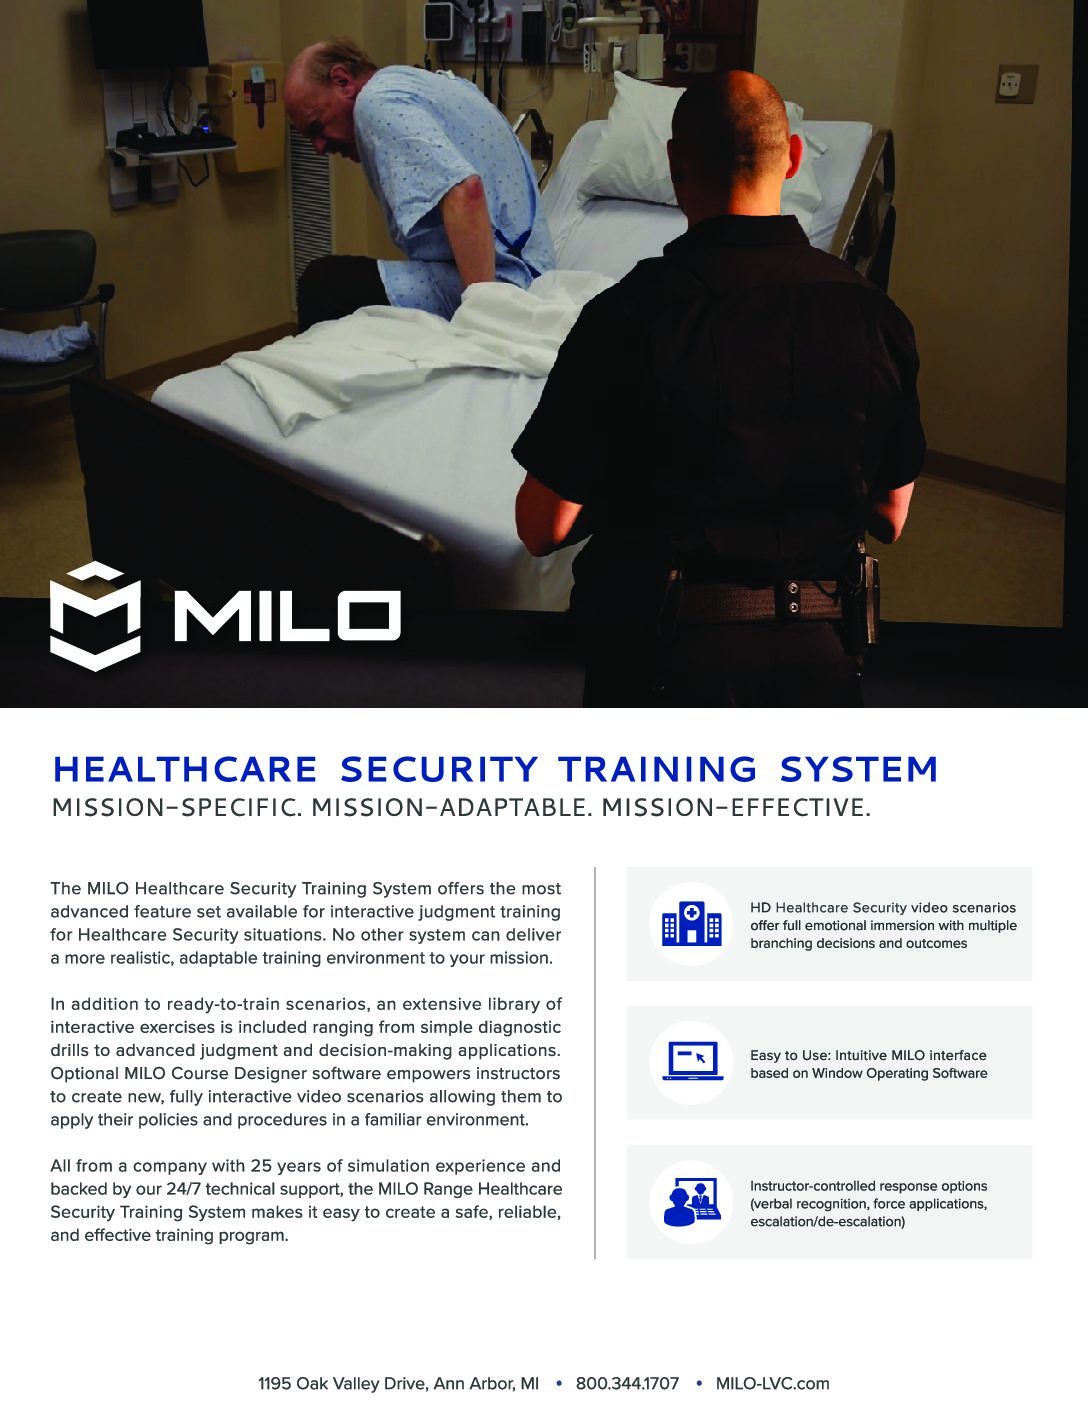 Healthcare security and safety training